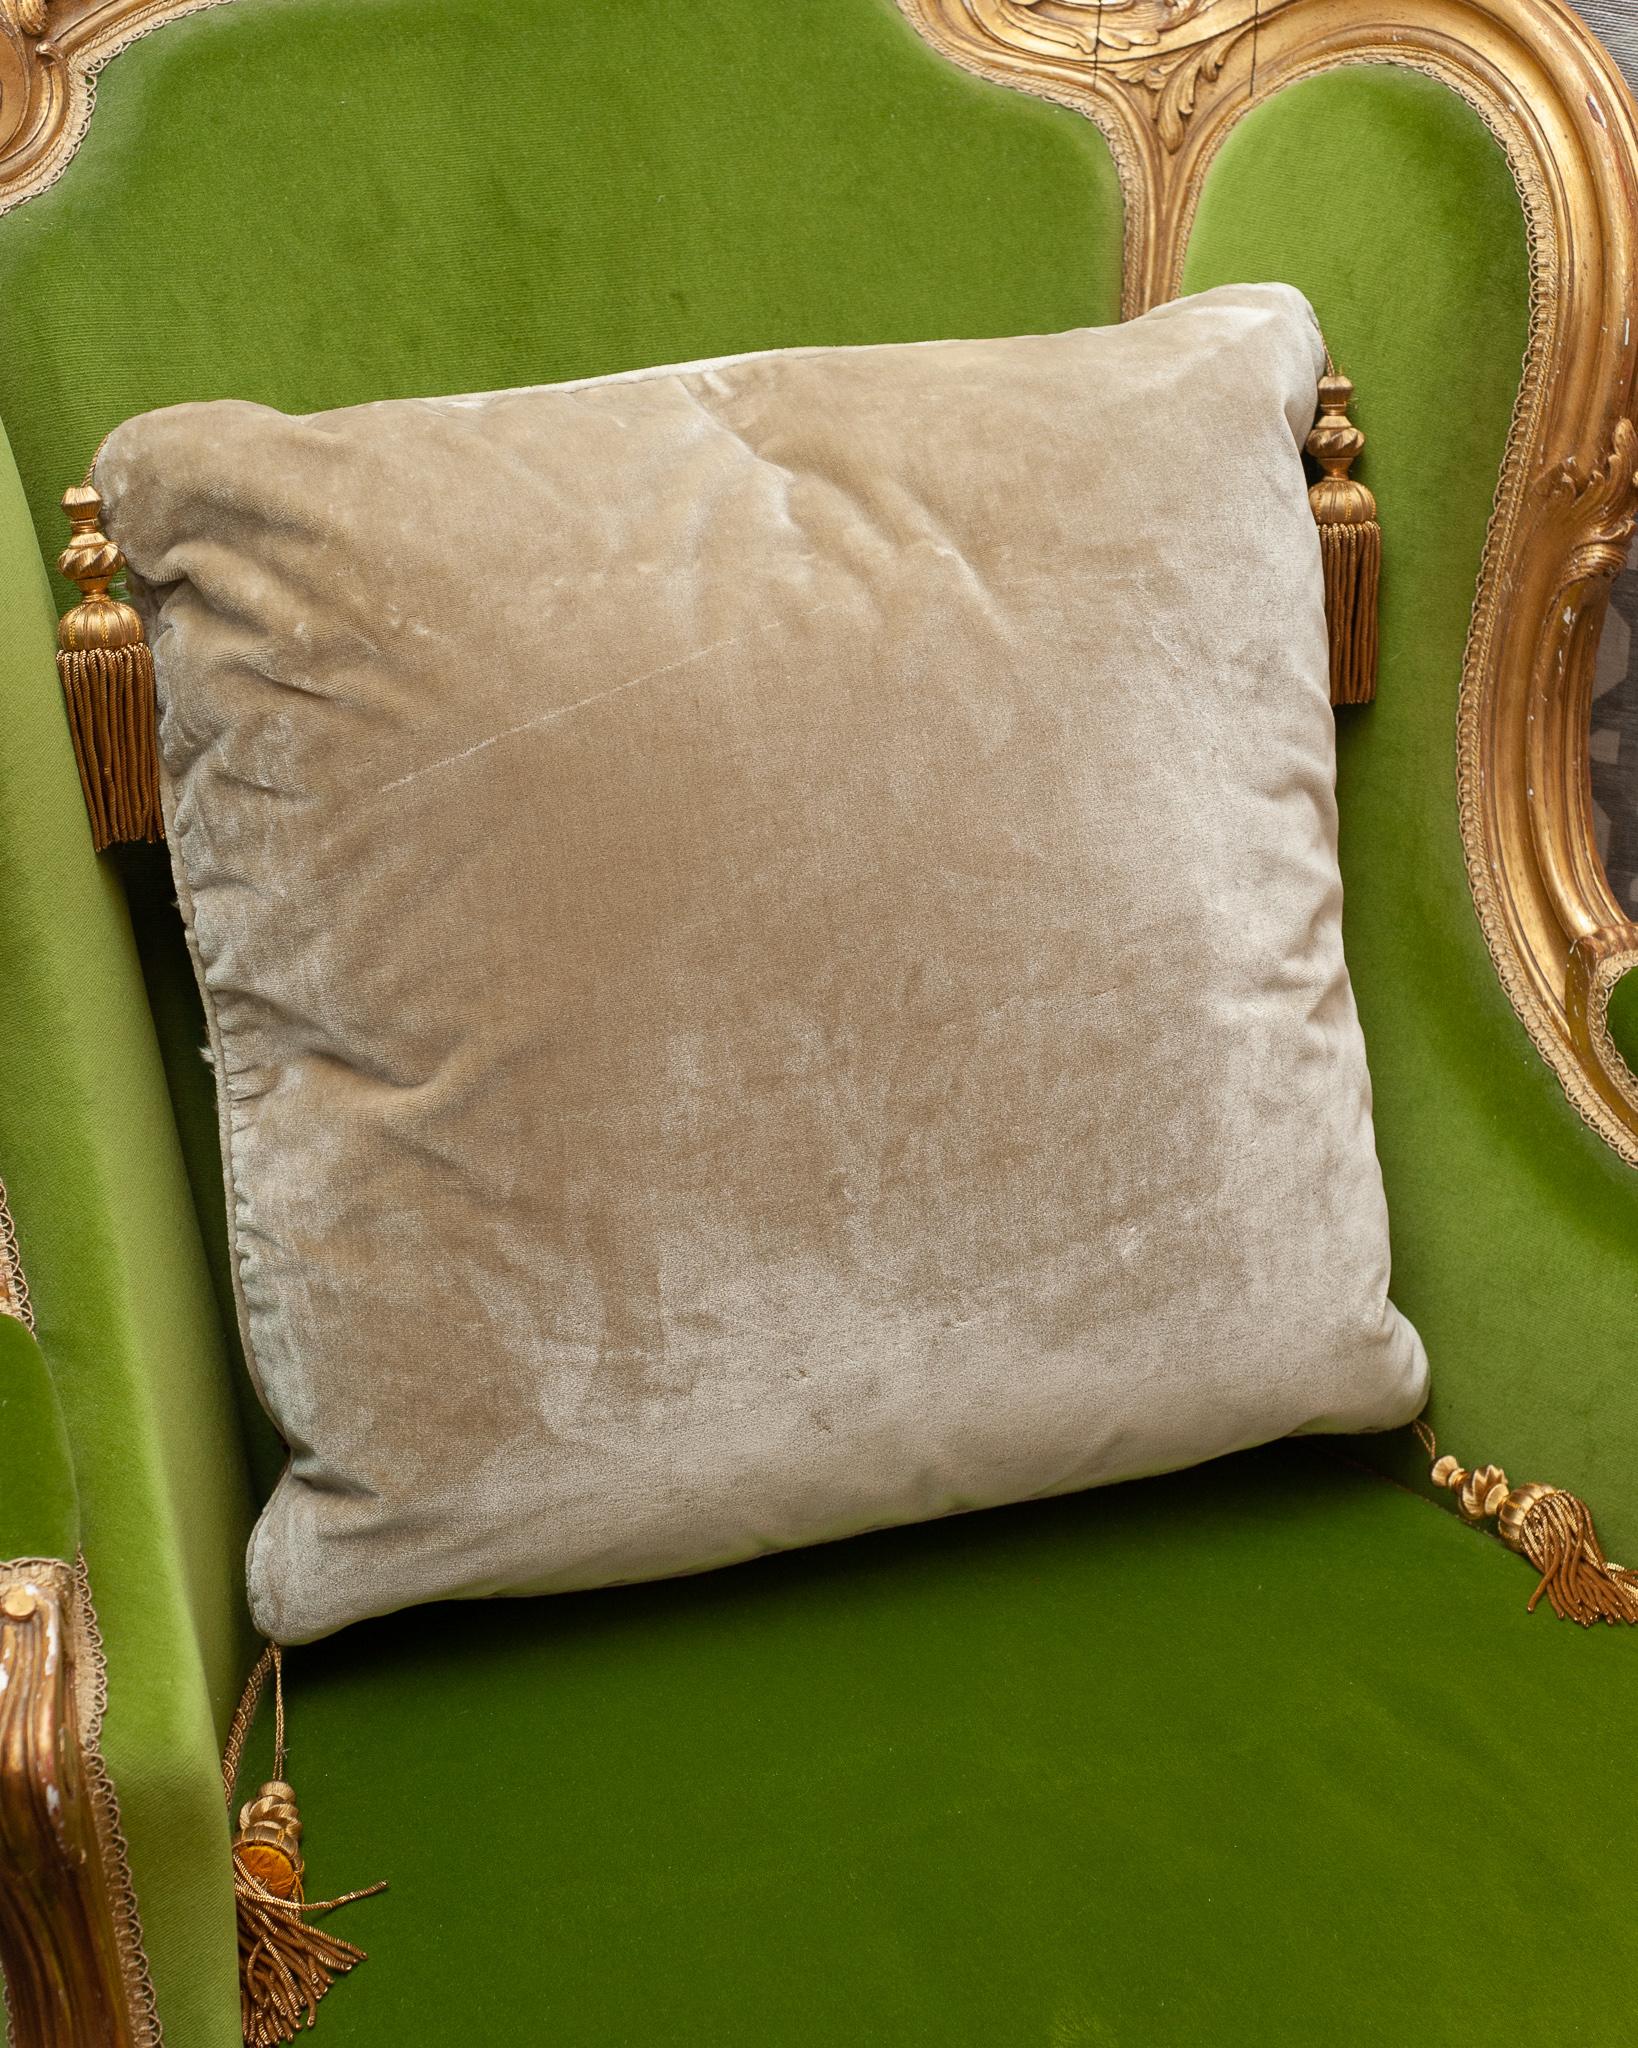 Contemporary Cream Silk Pillow with Antique Embroidered Textile Panel and Metallic Tassels For Sale